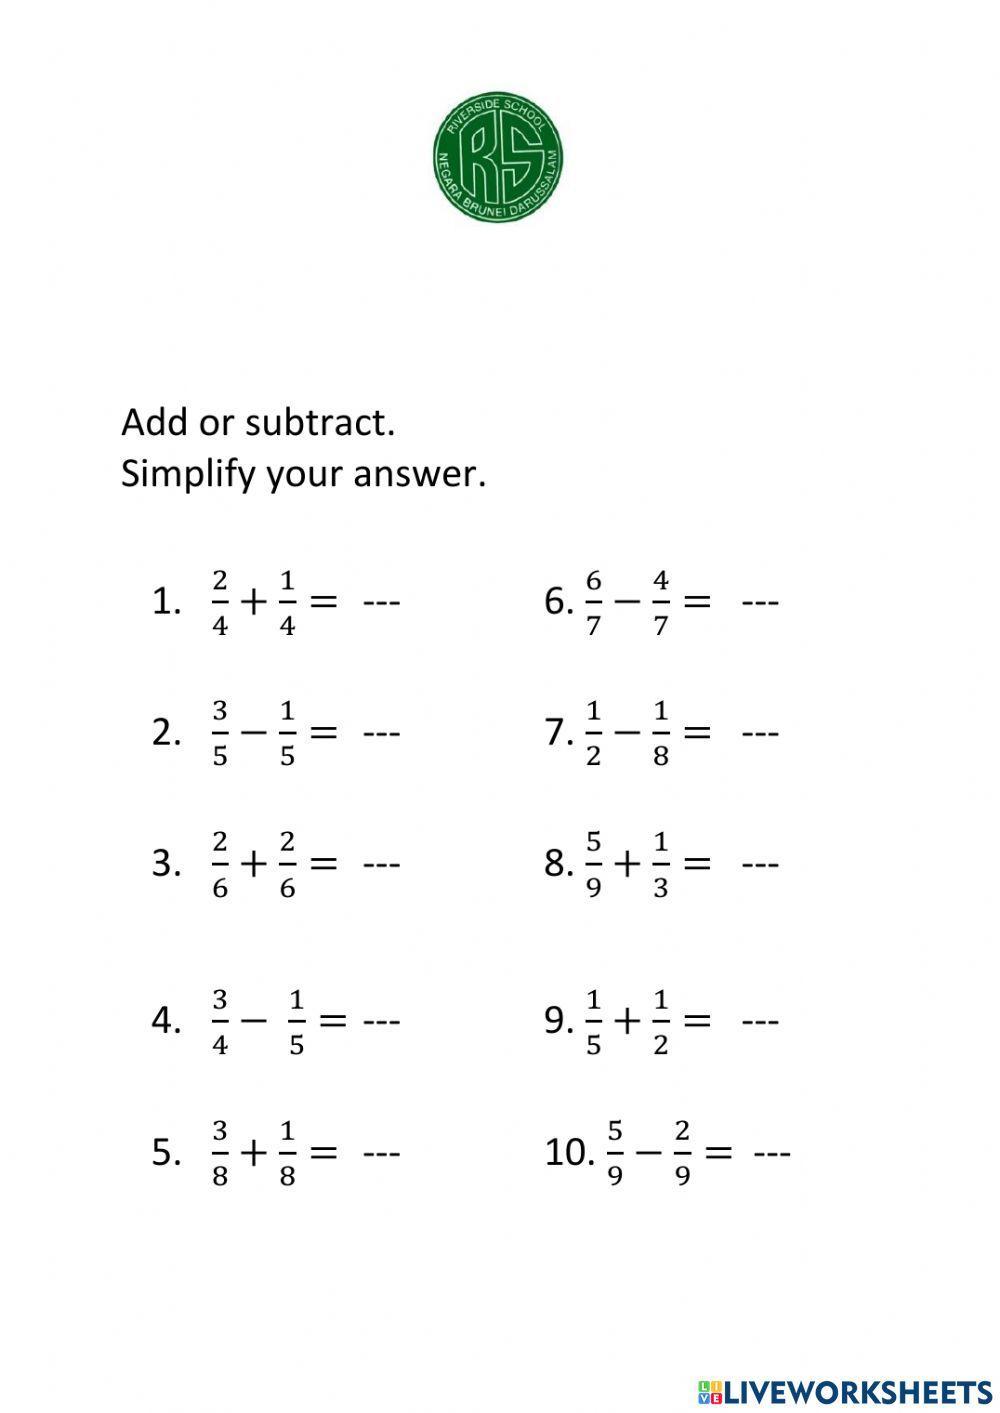 Adding or subtracting fraction. Simplify your answer.